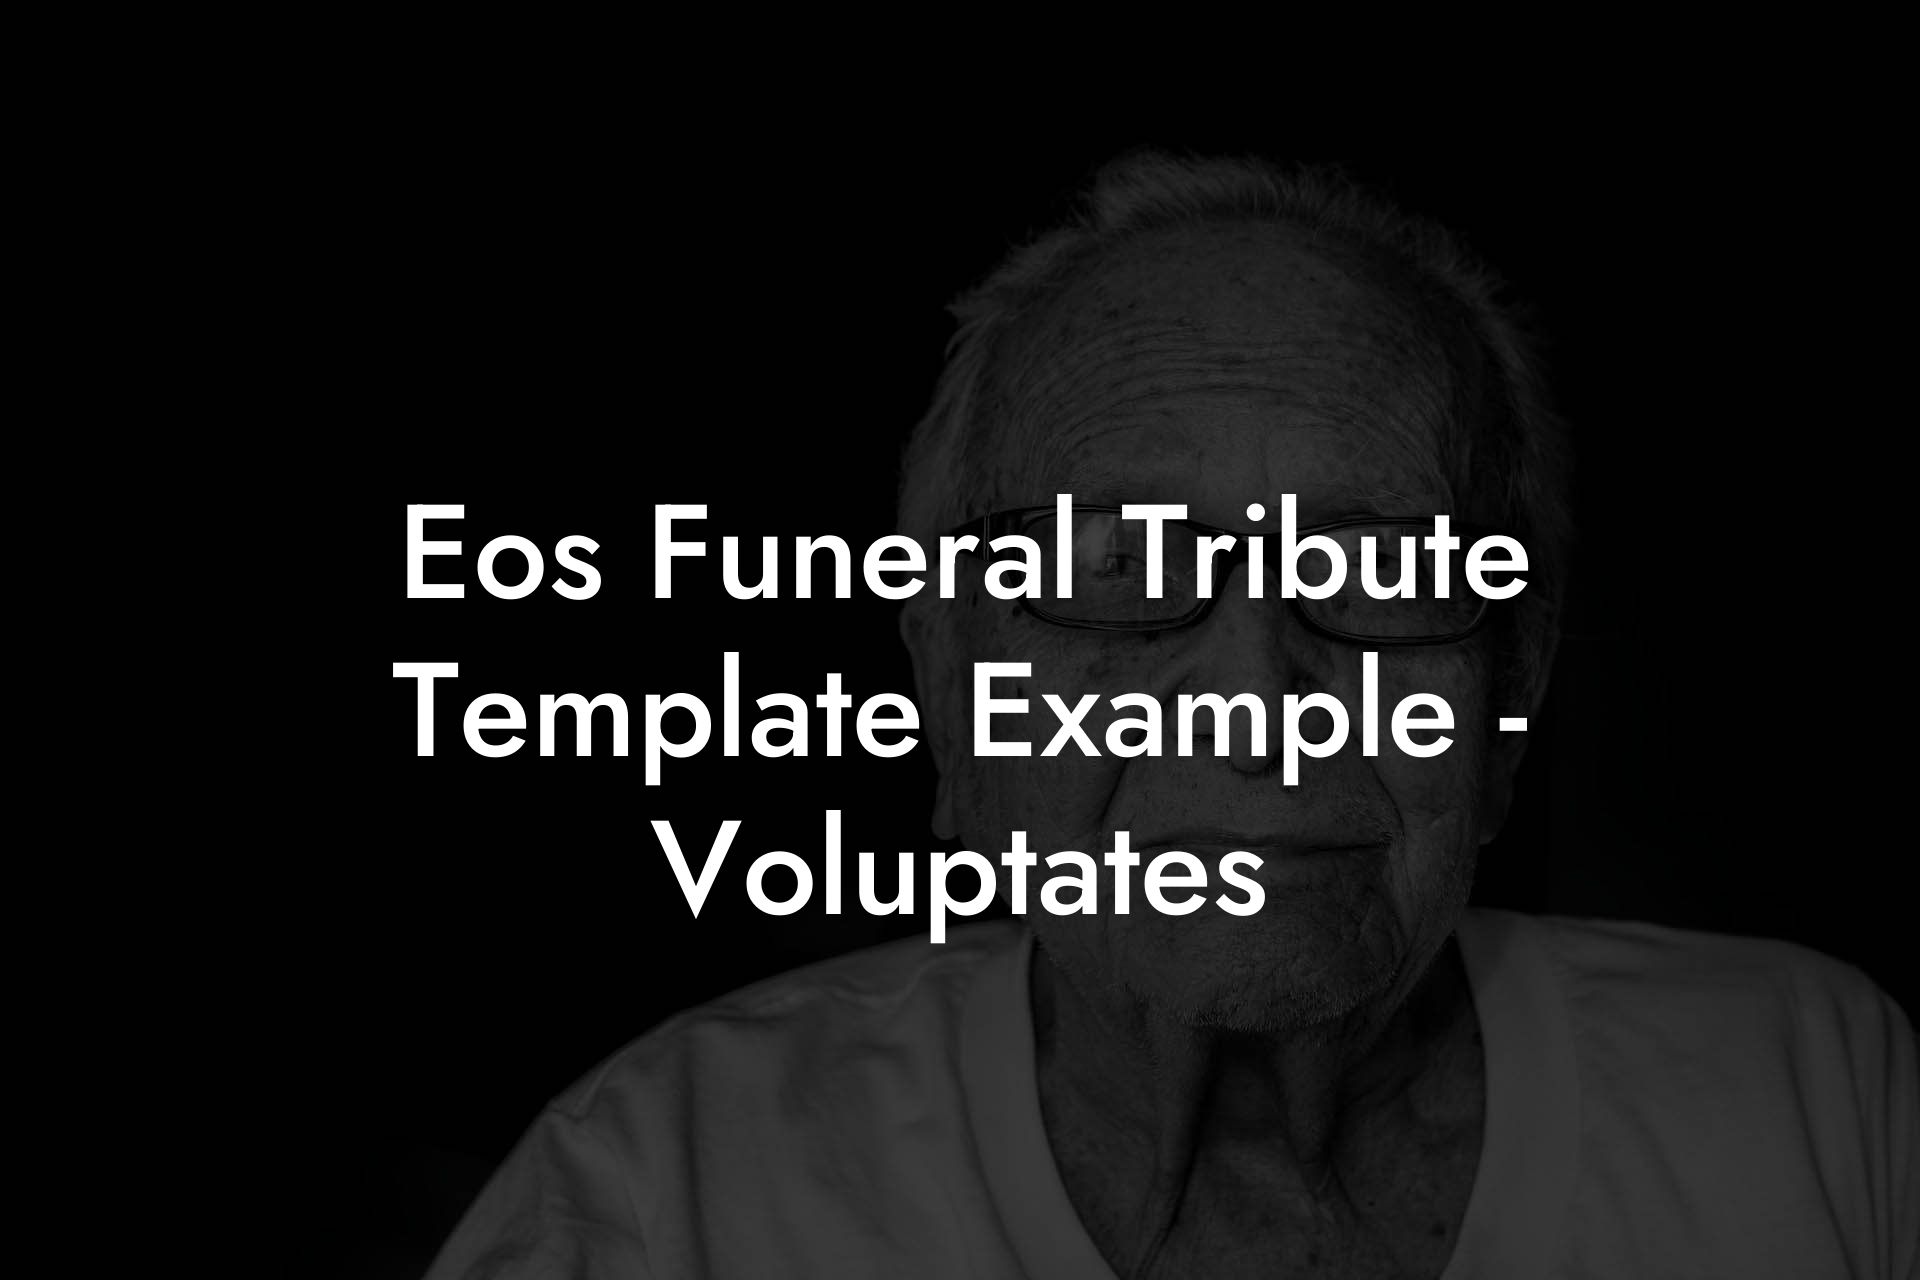 Eos Funeral Tribute Template Example - Voluptates